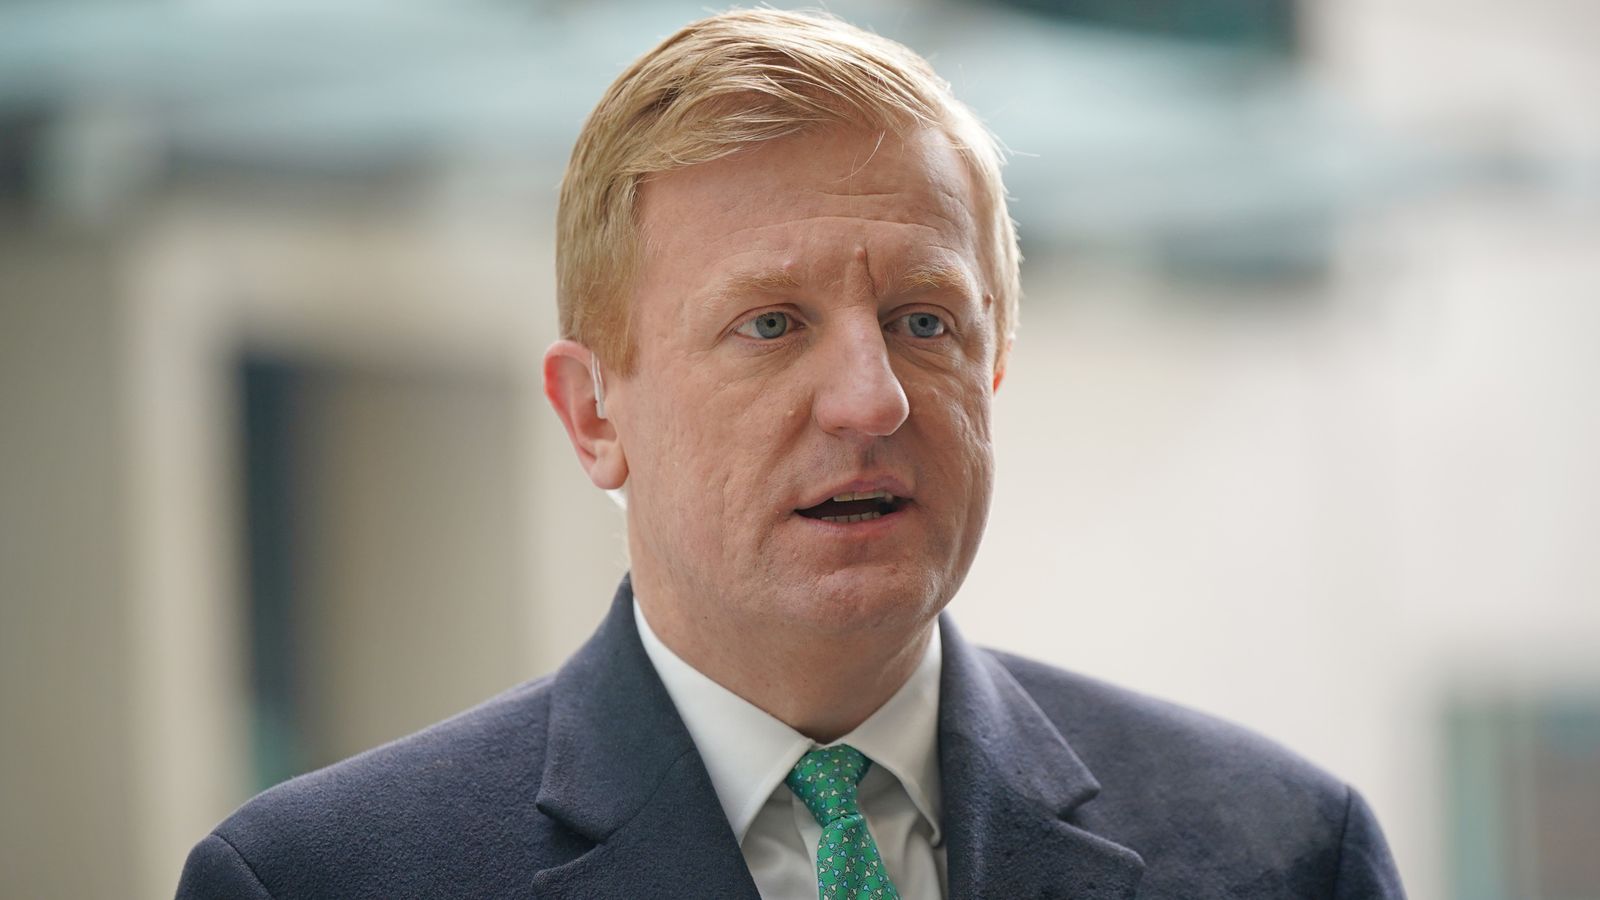 Israel has made 'big mistakes' in Gaza conflict, says Deputy PM Oliver Dowden